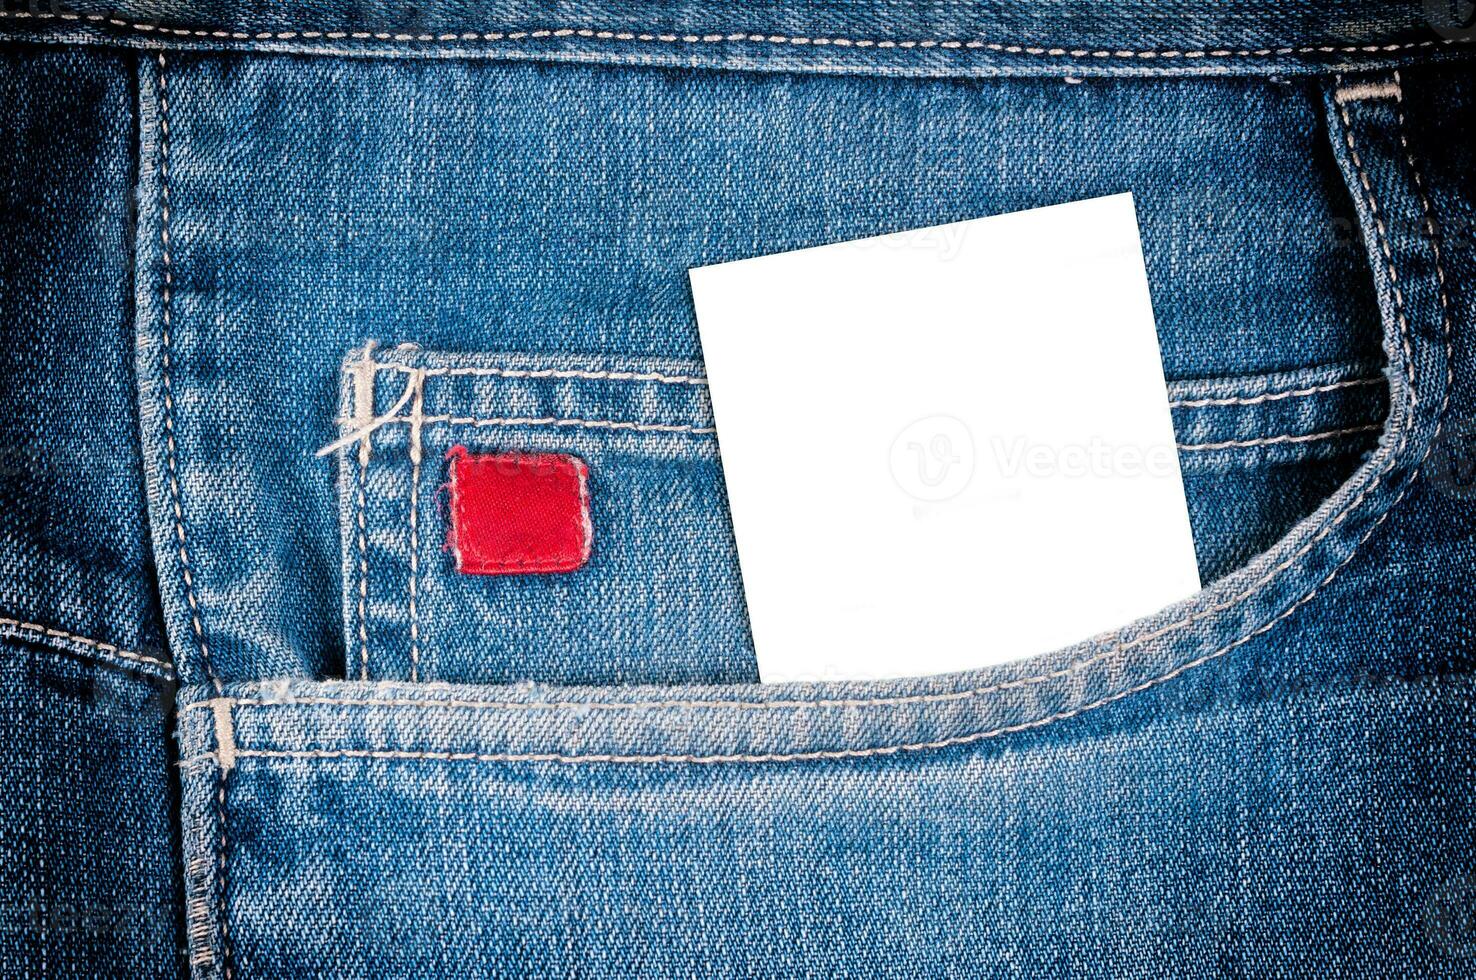 Jeans pocket with blank card photo